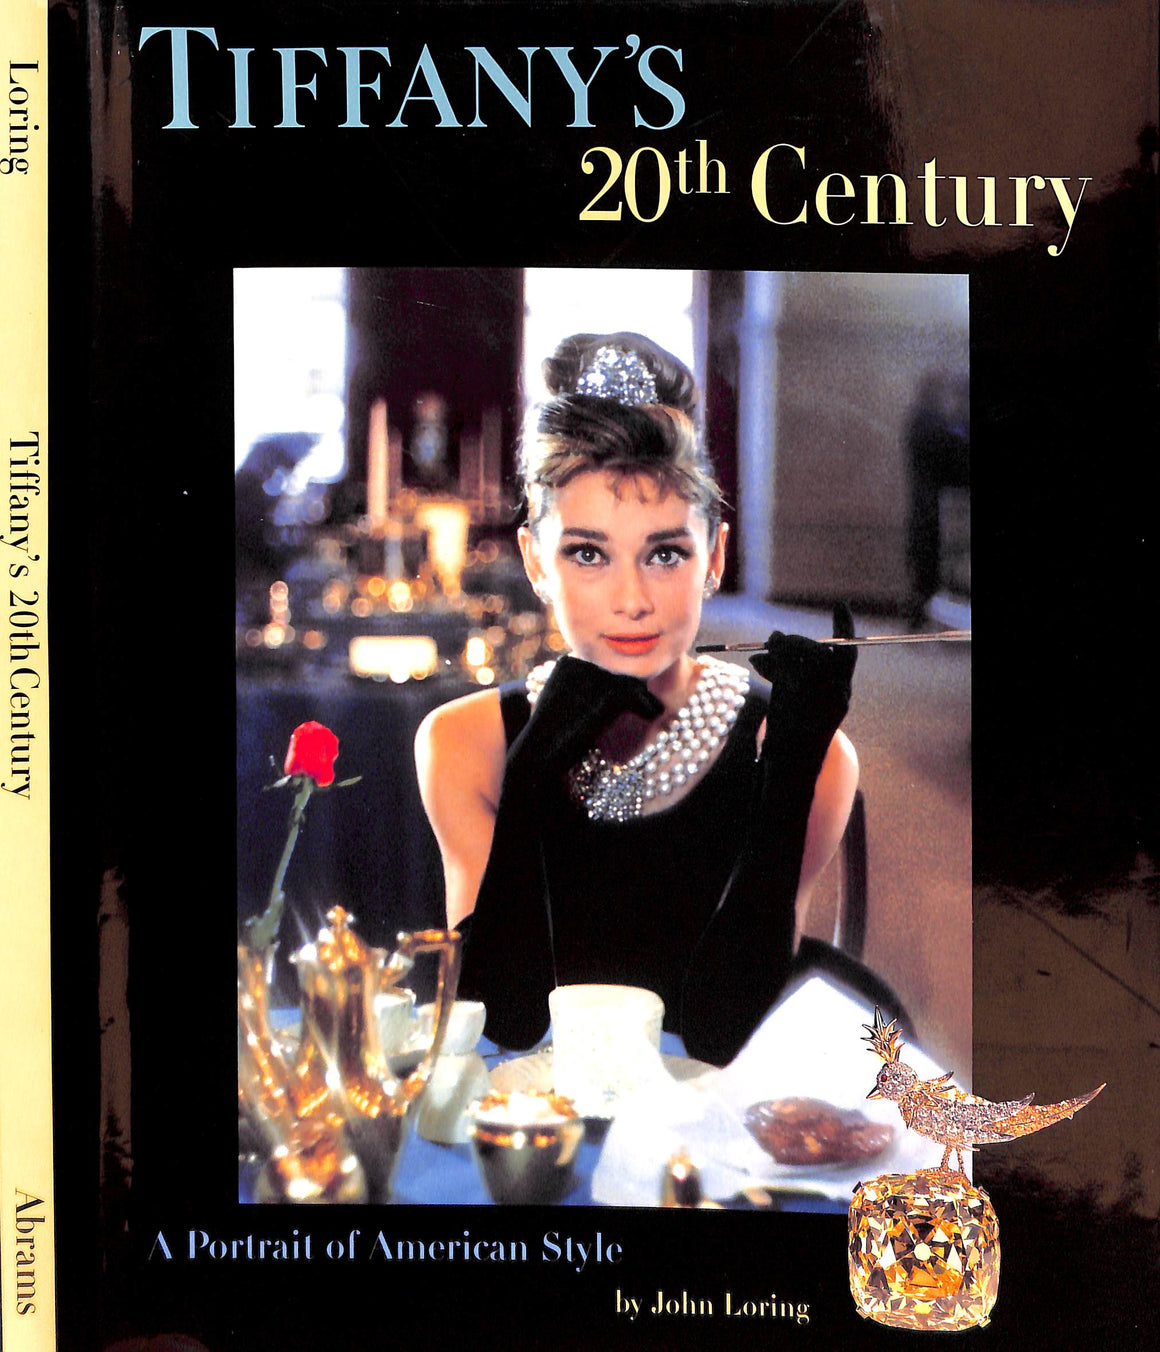 "Tiffany's 20th Century: A Portrait Of American Style" 1997 LORING, John (INSCRIBED)